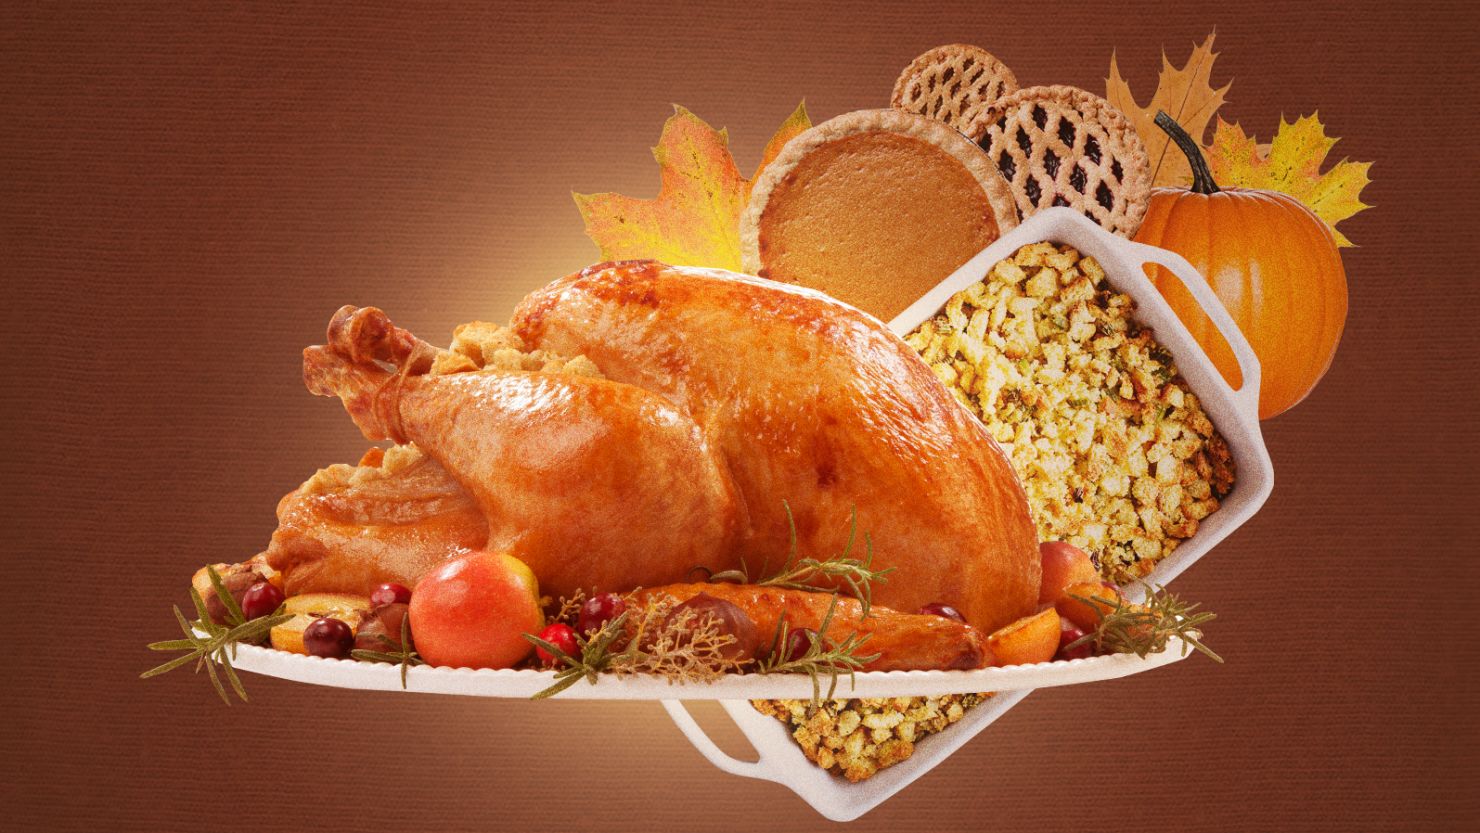 USA Travel Guide: 6 Things to Know About the American Thanksgiving